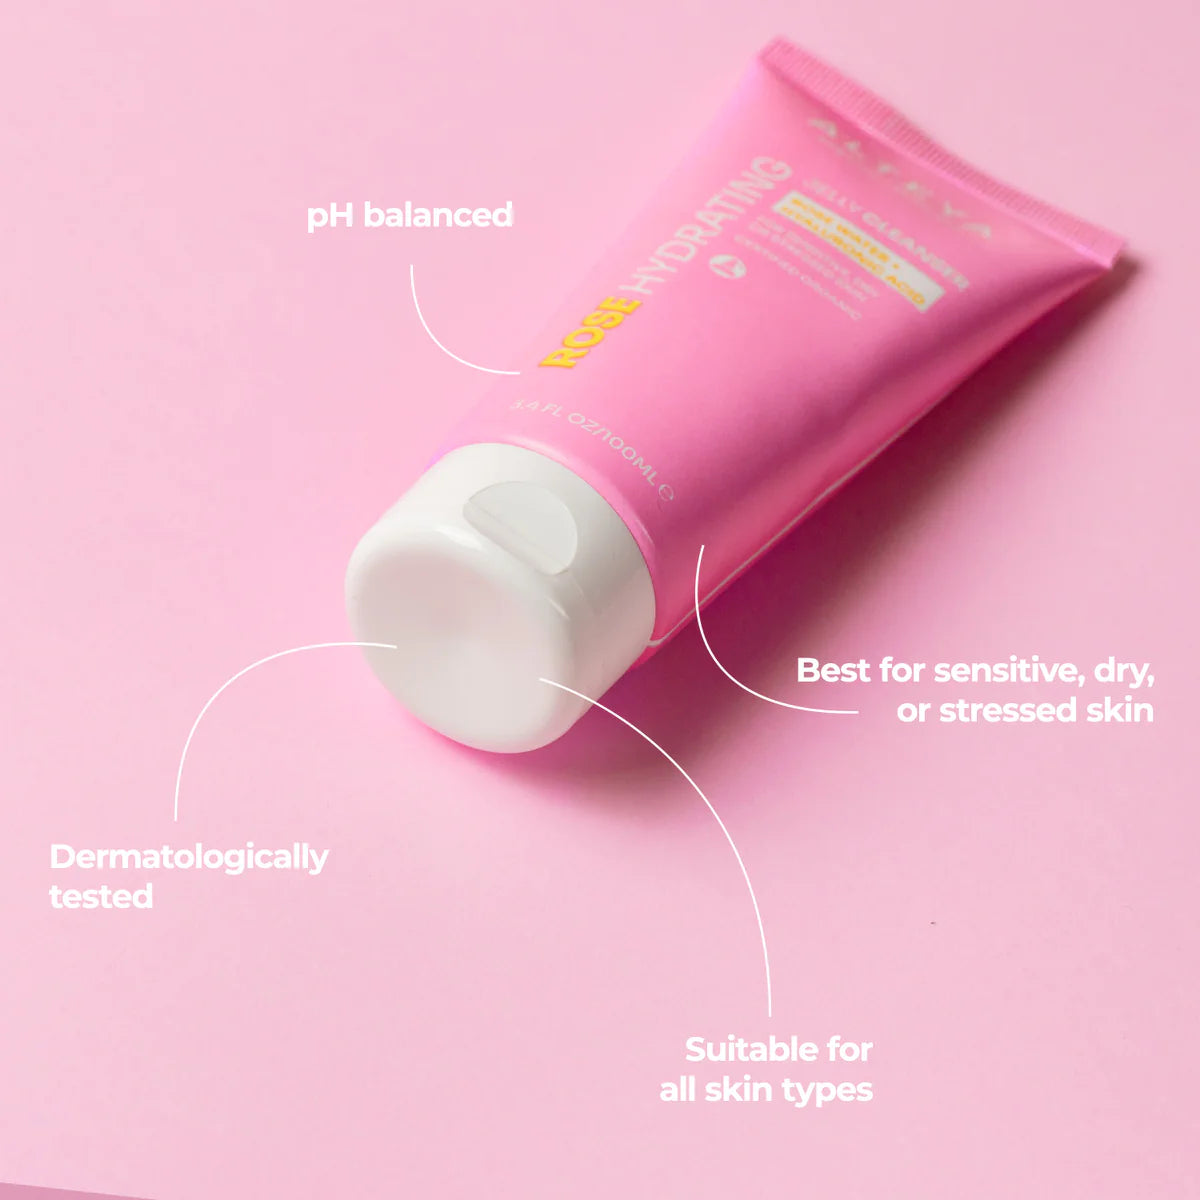 A tube of Alteya Organics Rose Hydrating Jelly Cleanser, enriched with organic rose water and hyaluronic acid, on a pink background.